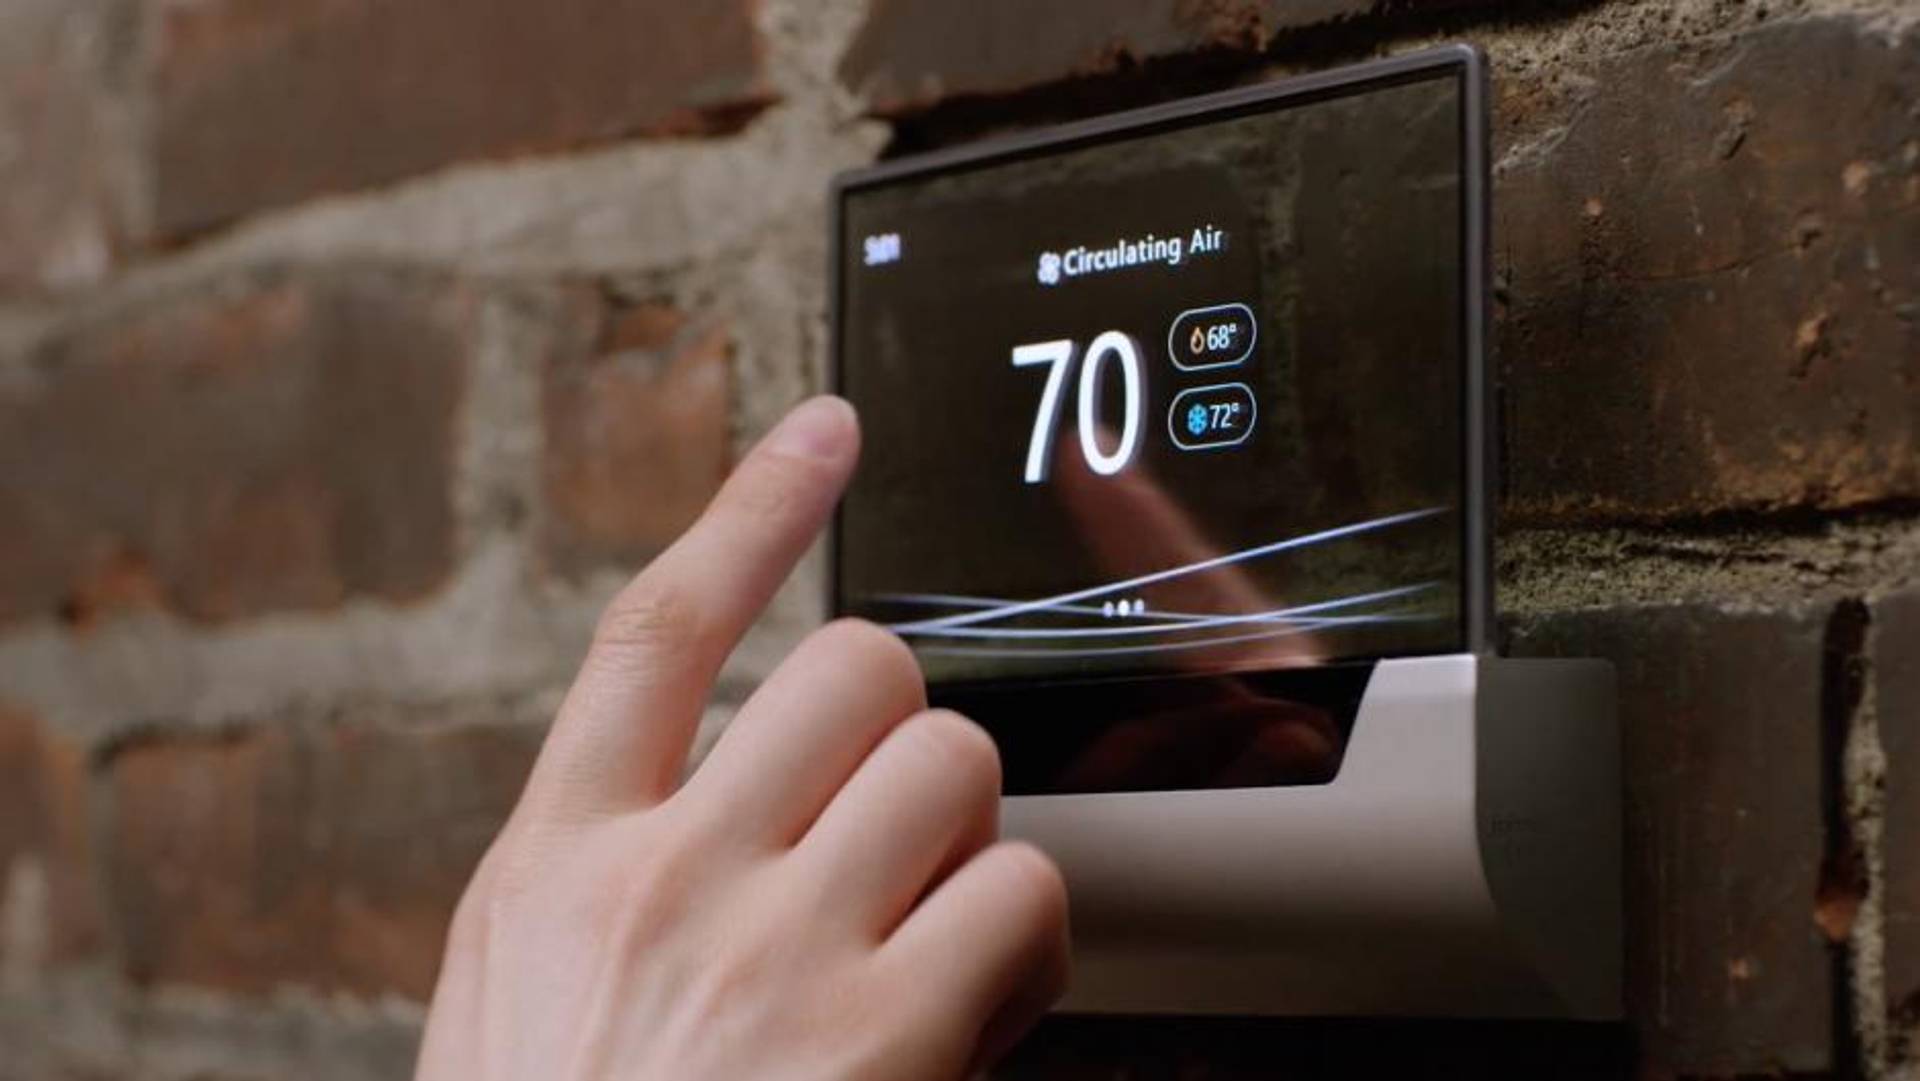 Microsoft's GLAS thermostat is designed to blend in